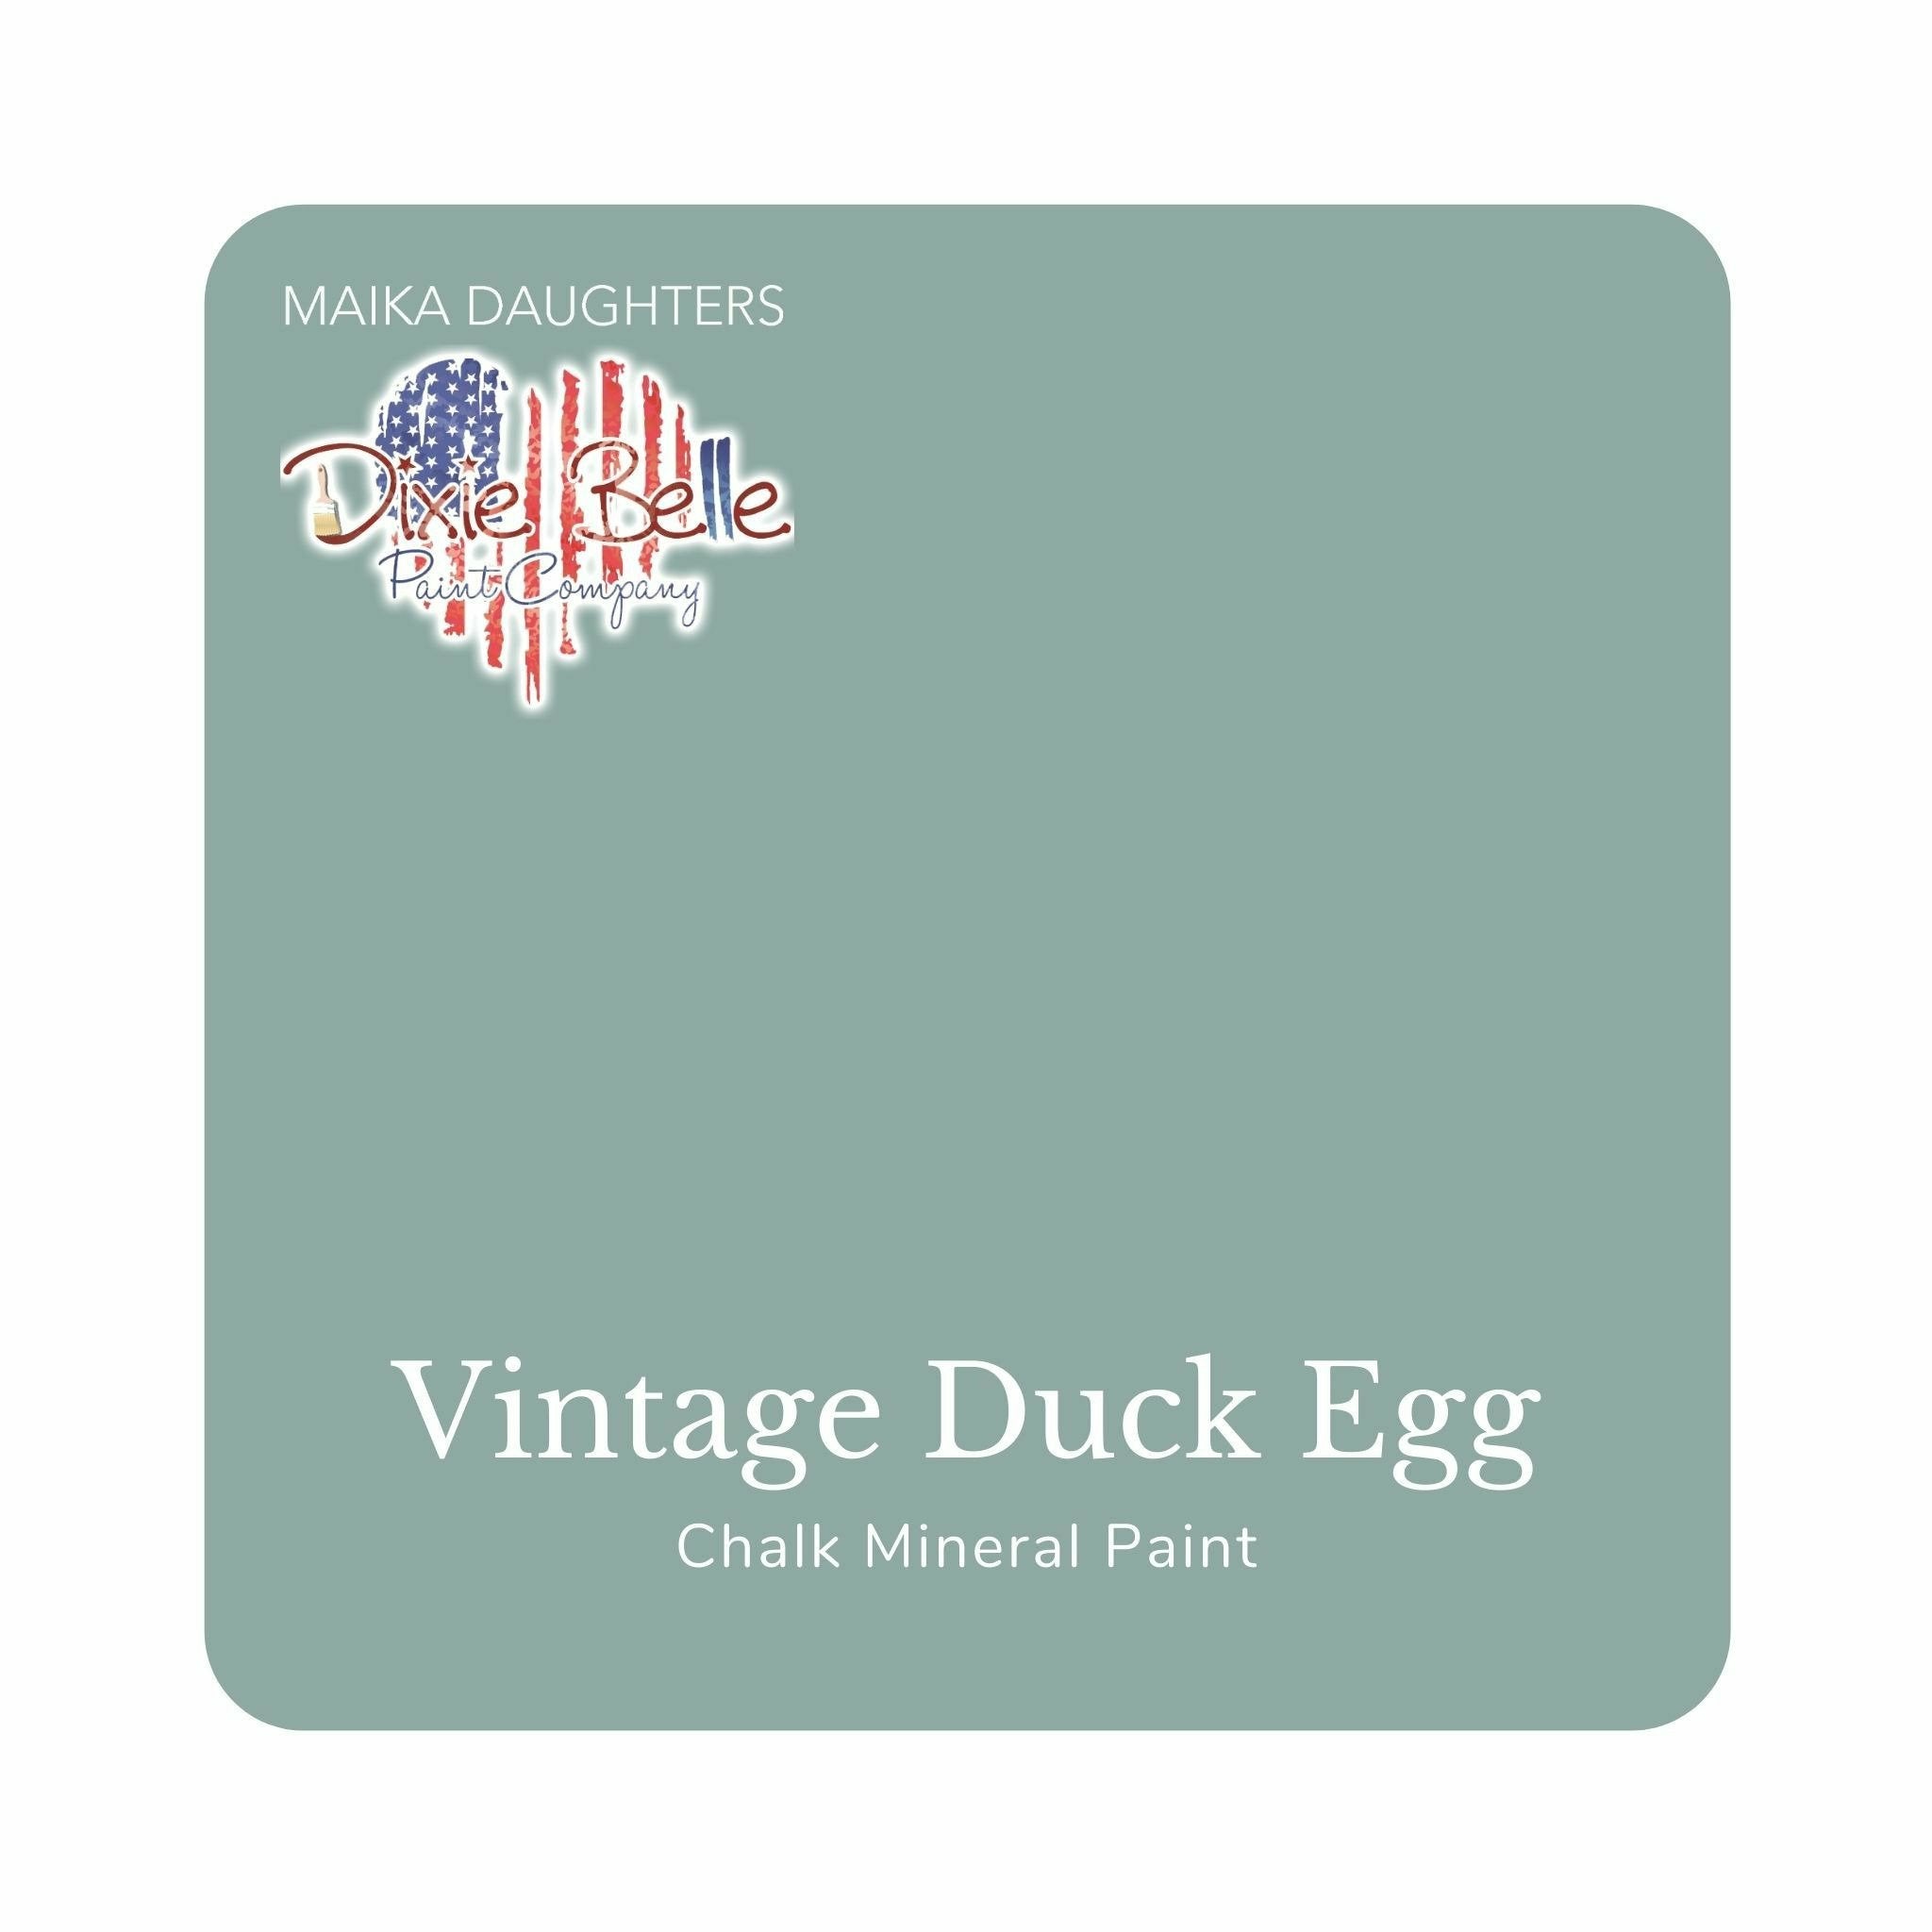 A square swatch card of Dixie Belle Paint Company’s Vintage Duck Egg Chalk Mineral Paint is against a white background. This color is a soft light blue with hints of gray and green.